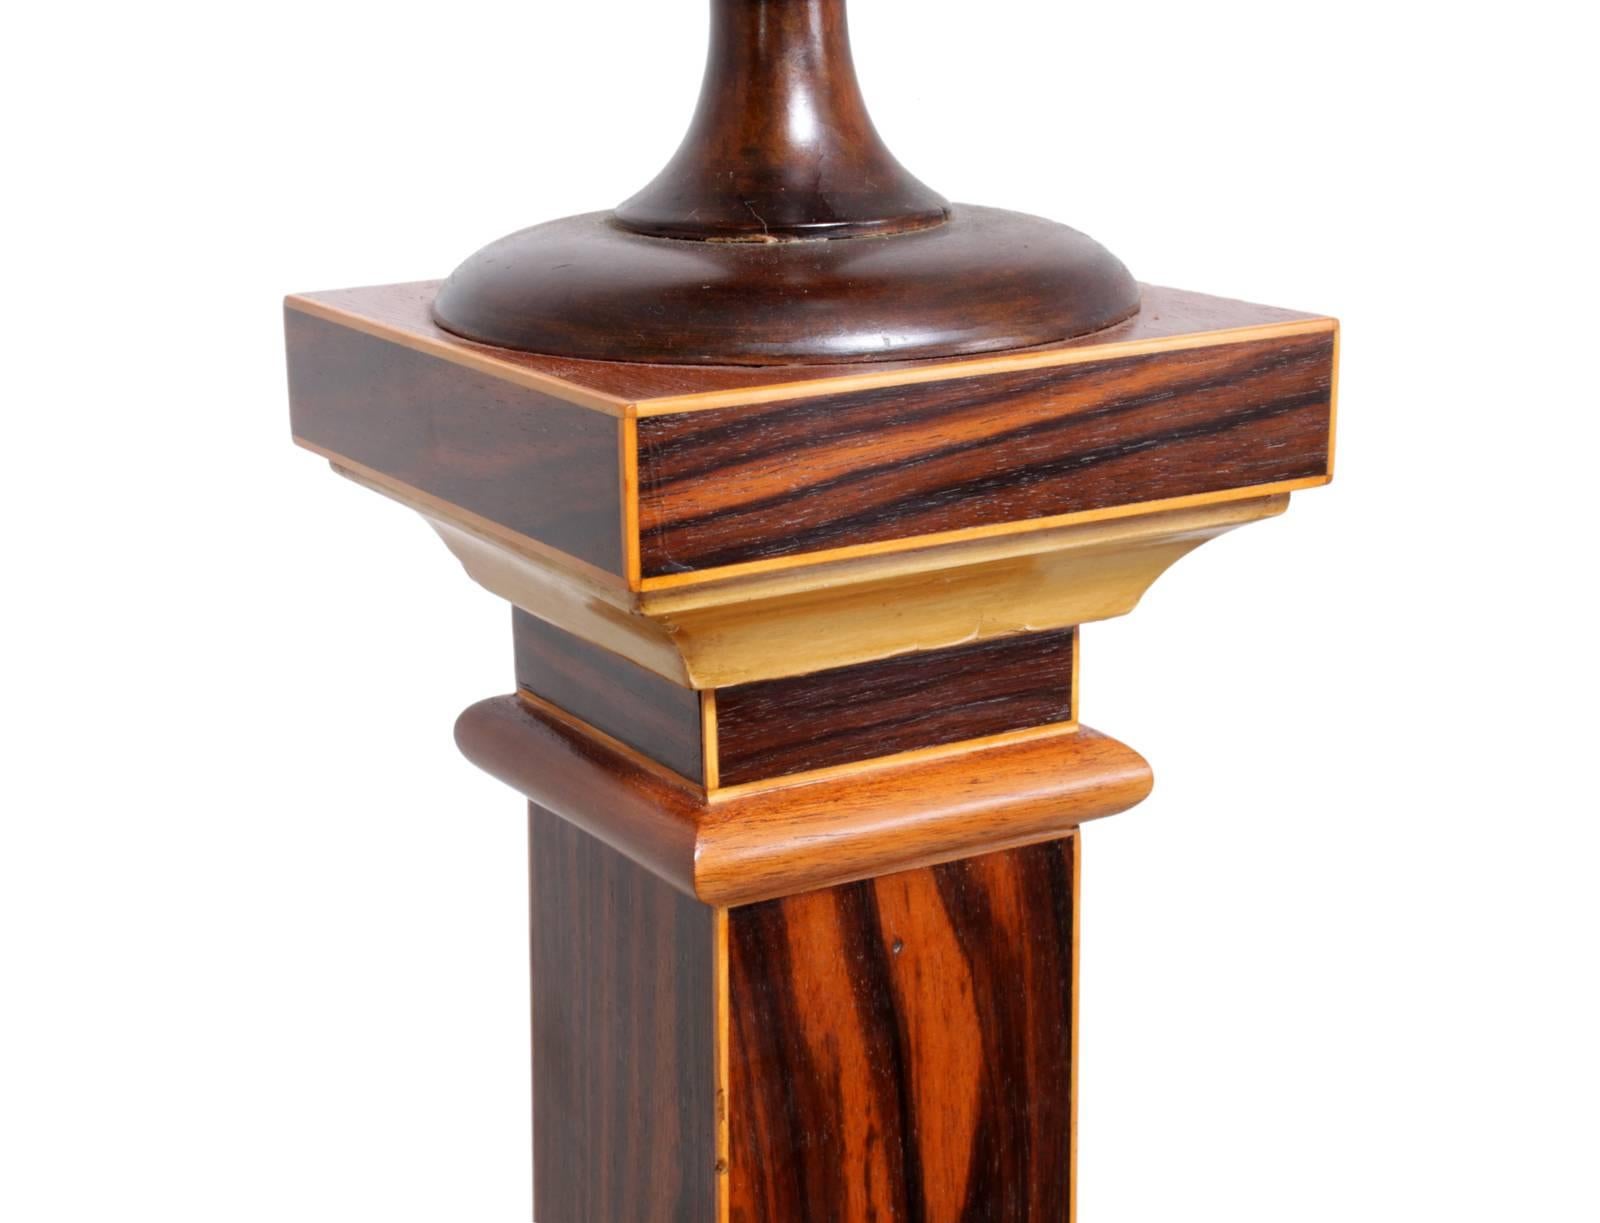 Art Deco standard lamp in Macassar ebony
A very important standard lamp in Macassar ebony with contrasting stringing, the lamp has been fully restored, polished and re wired and is in excellent condition.

Age: 1930

Style: Art